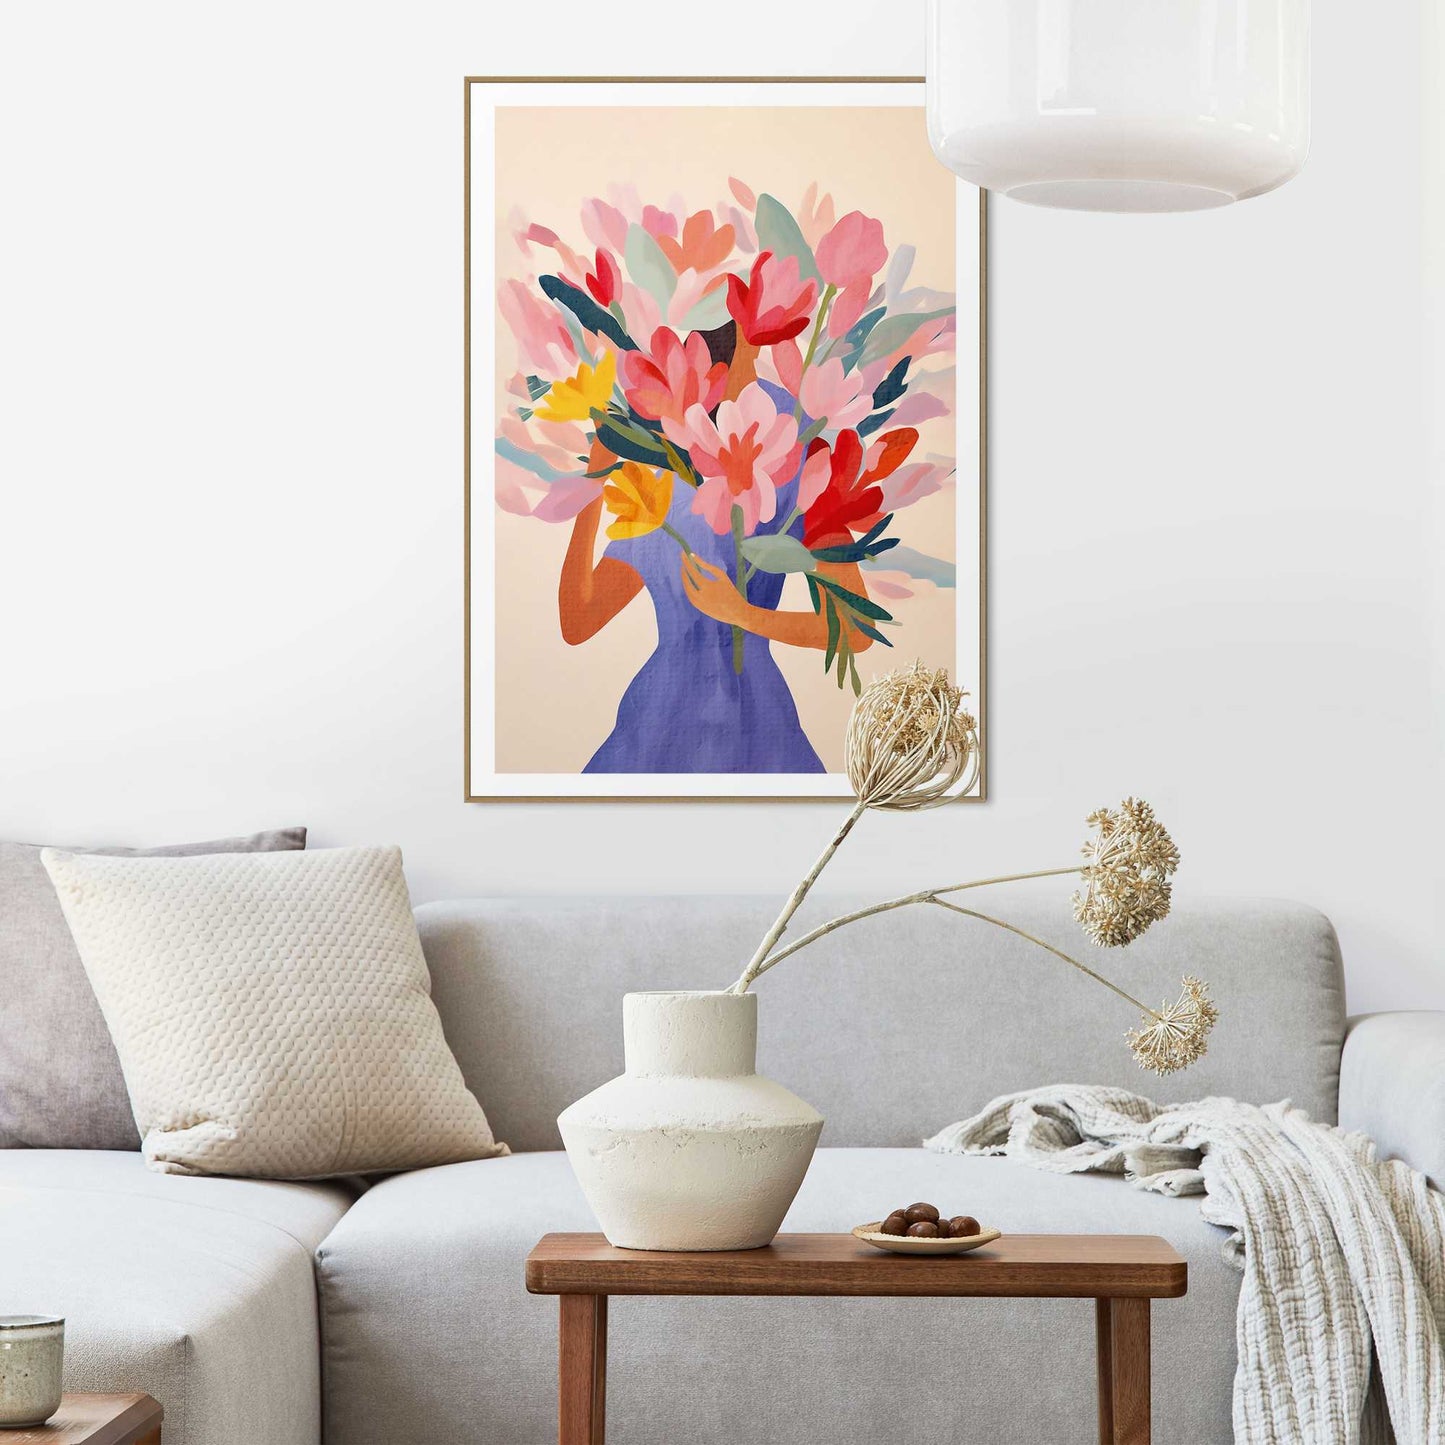 Framed in Wood Dressed Lady Flowers 70x50